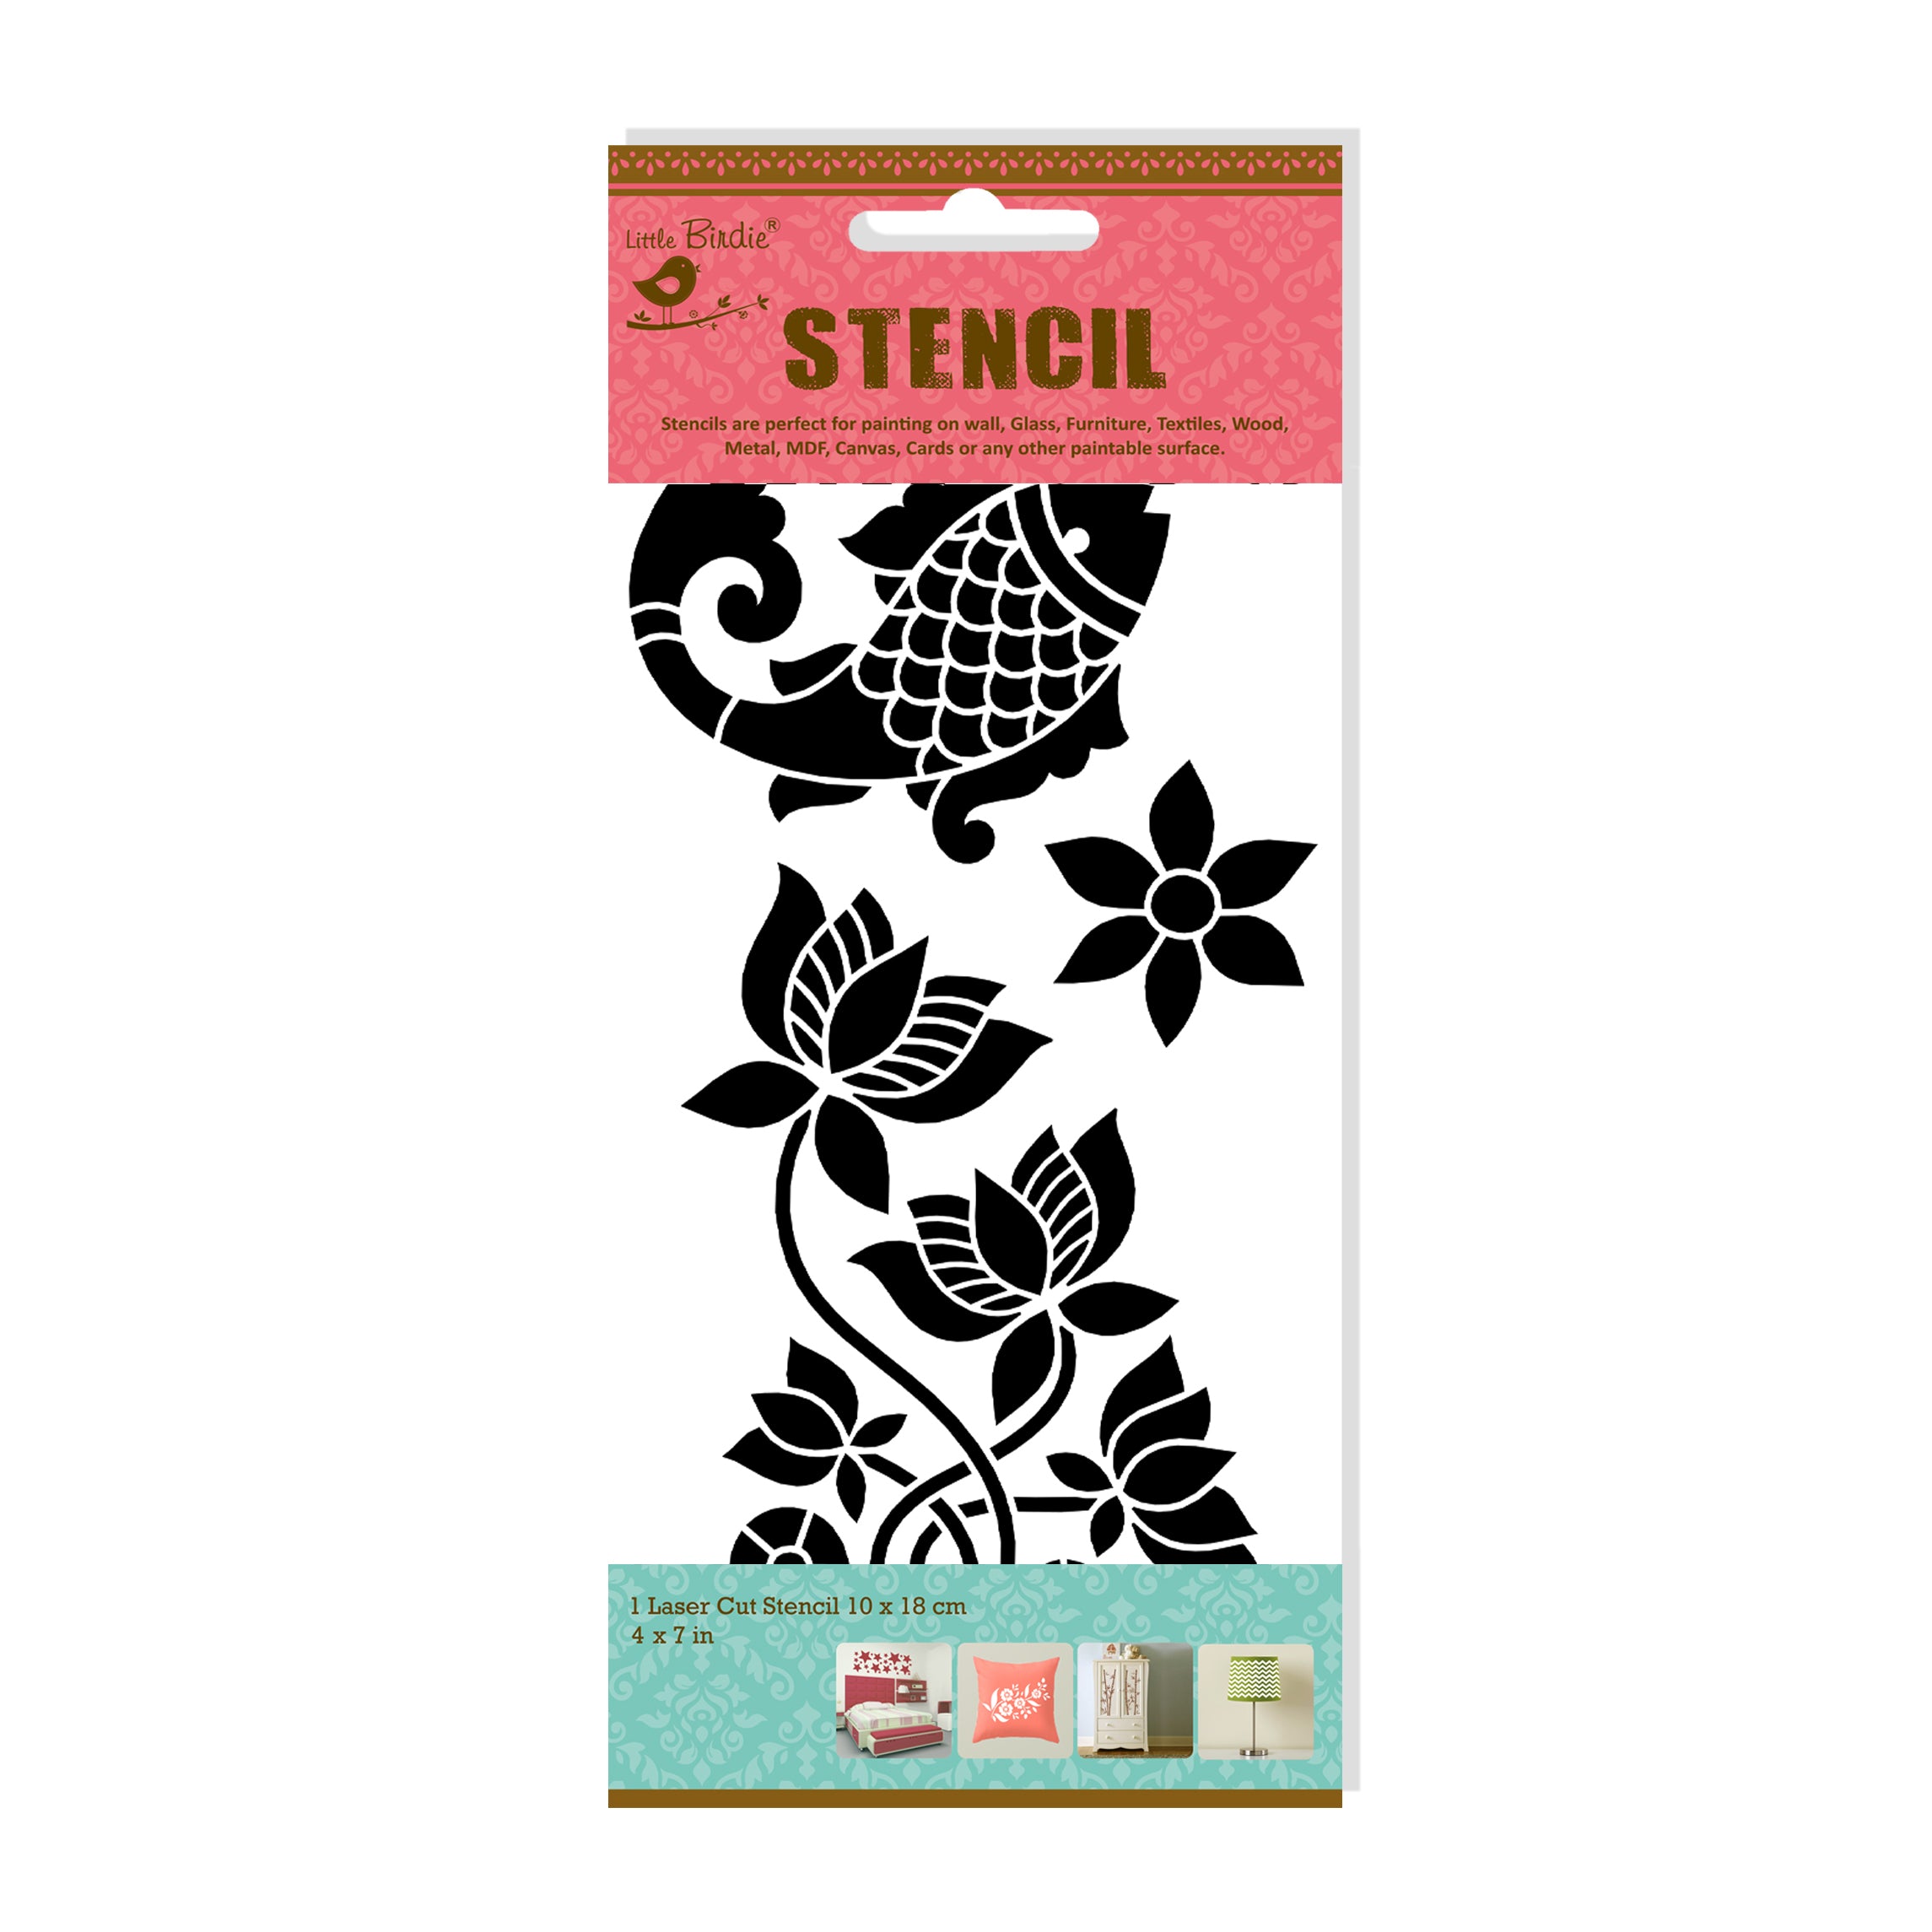 LITTLE BIRDIE Stencil Flower W/Stem, 18.5 X 24.5 cm, Pack of 2 Drawing,  Painting Stencil Price in India - Buy LITTLE BIRDIE Stencil Flower W/Stem, 18.5 X 24.5 cm